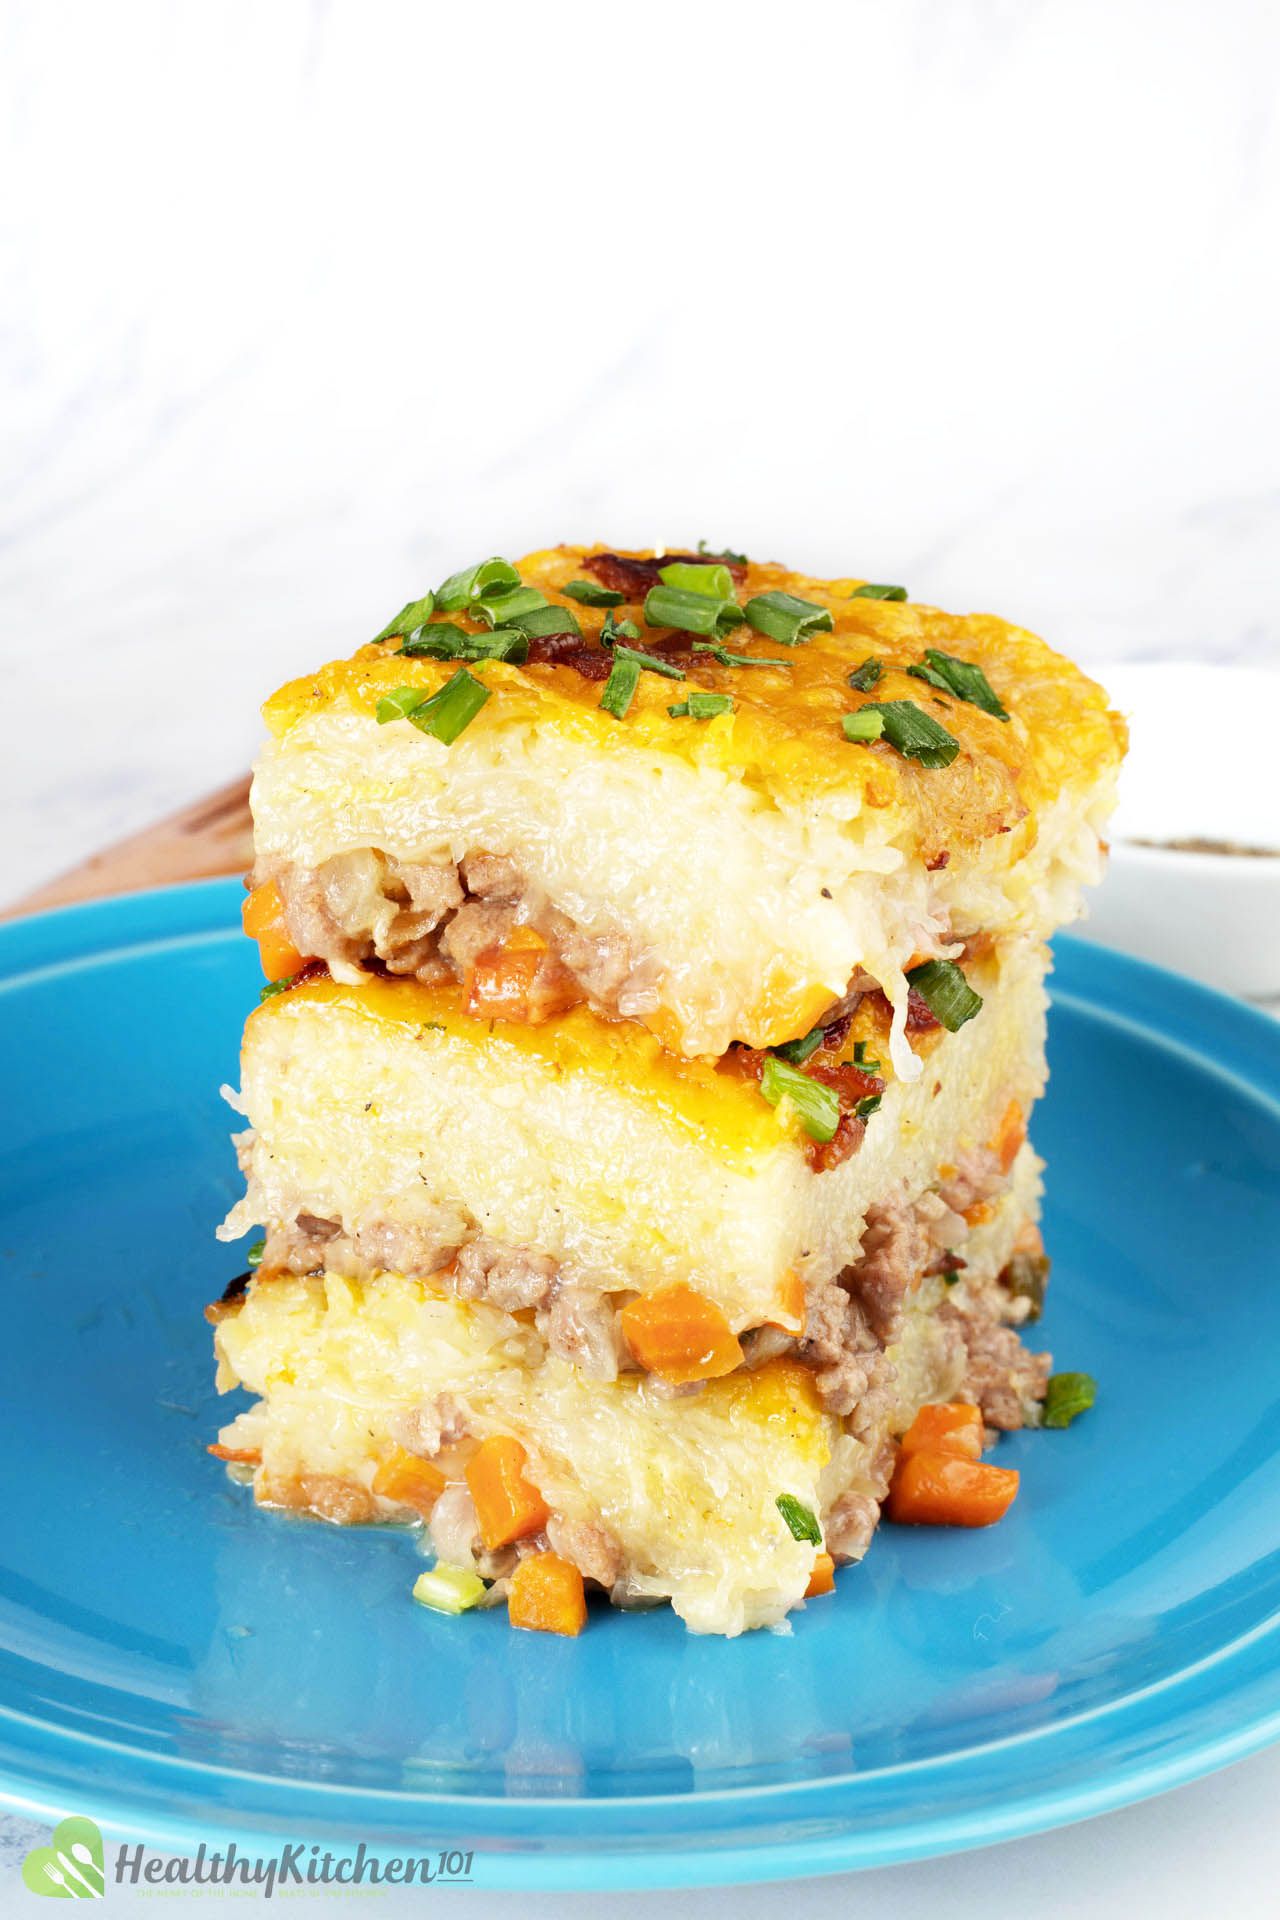 How to Make Hashbrown Casserole